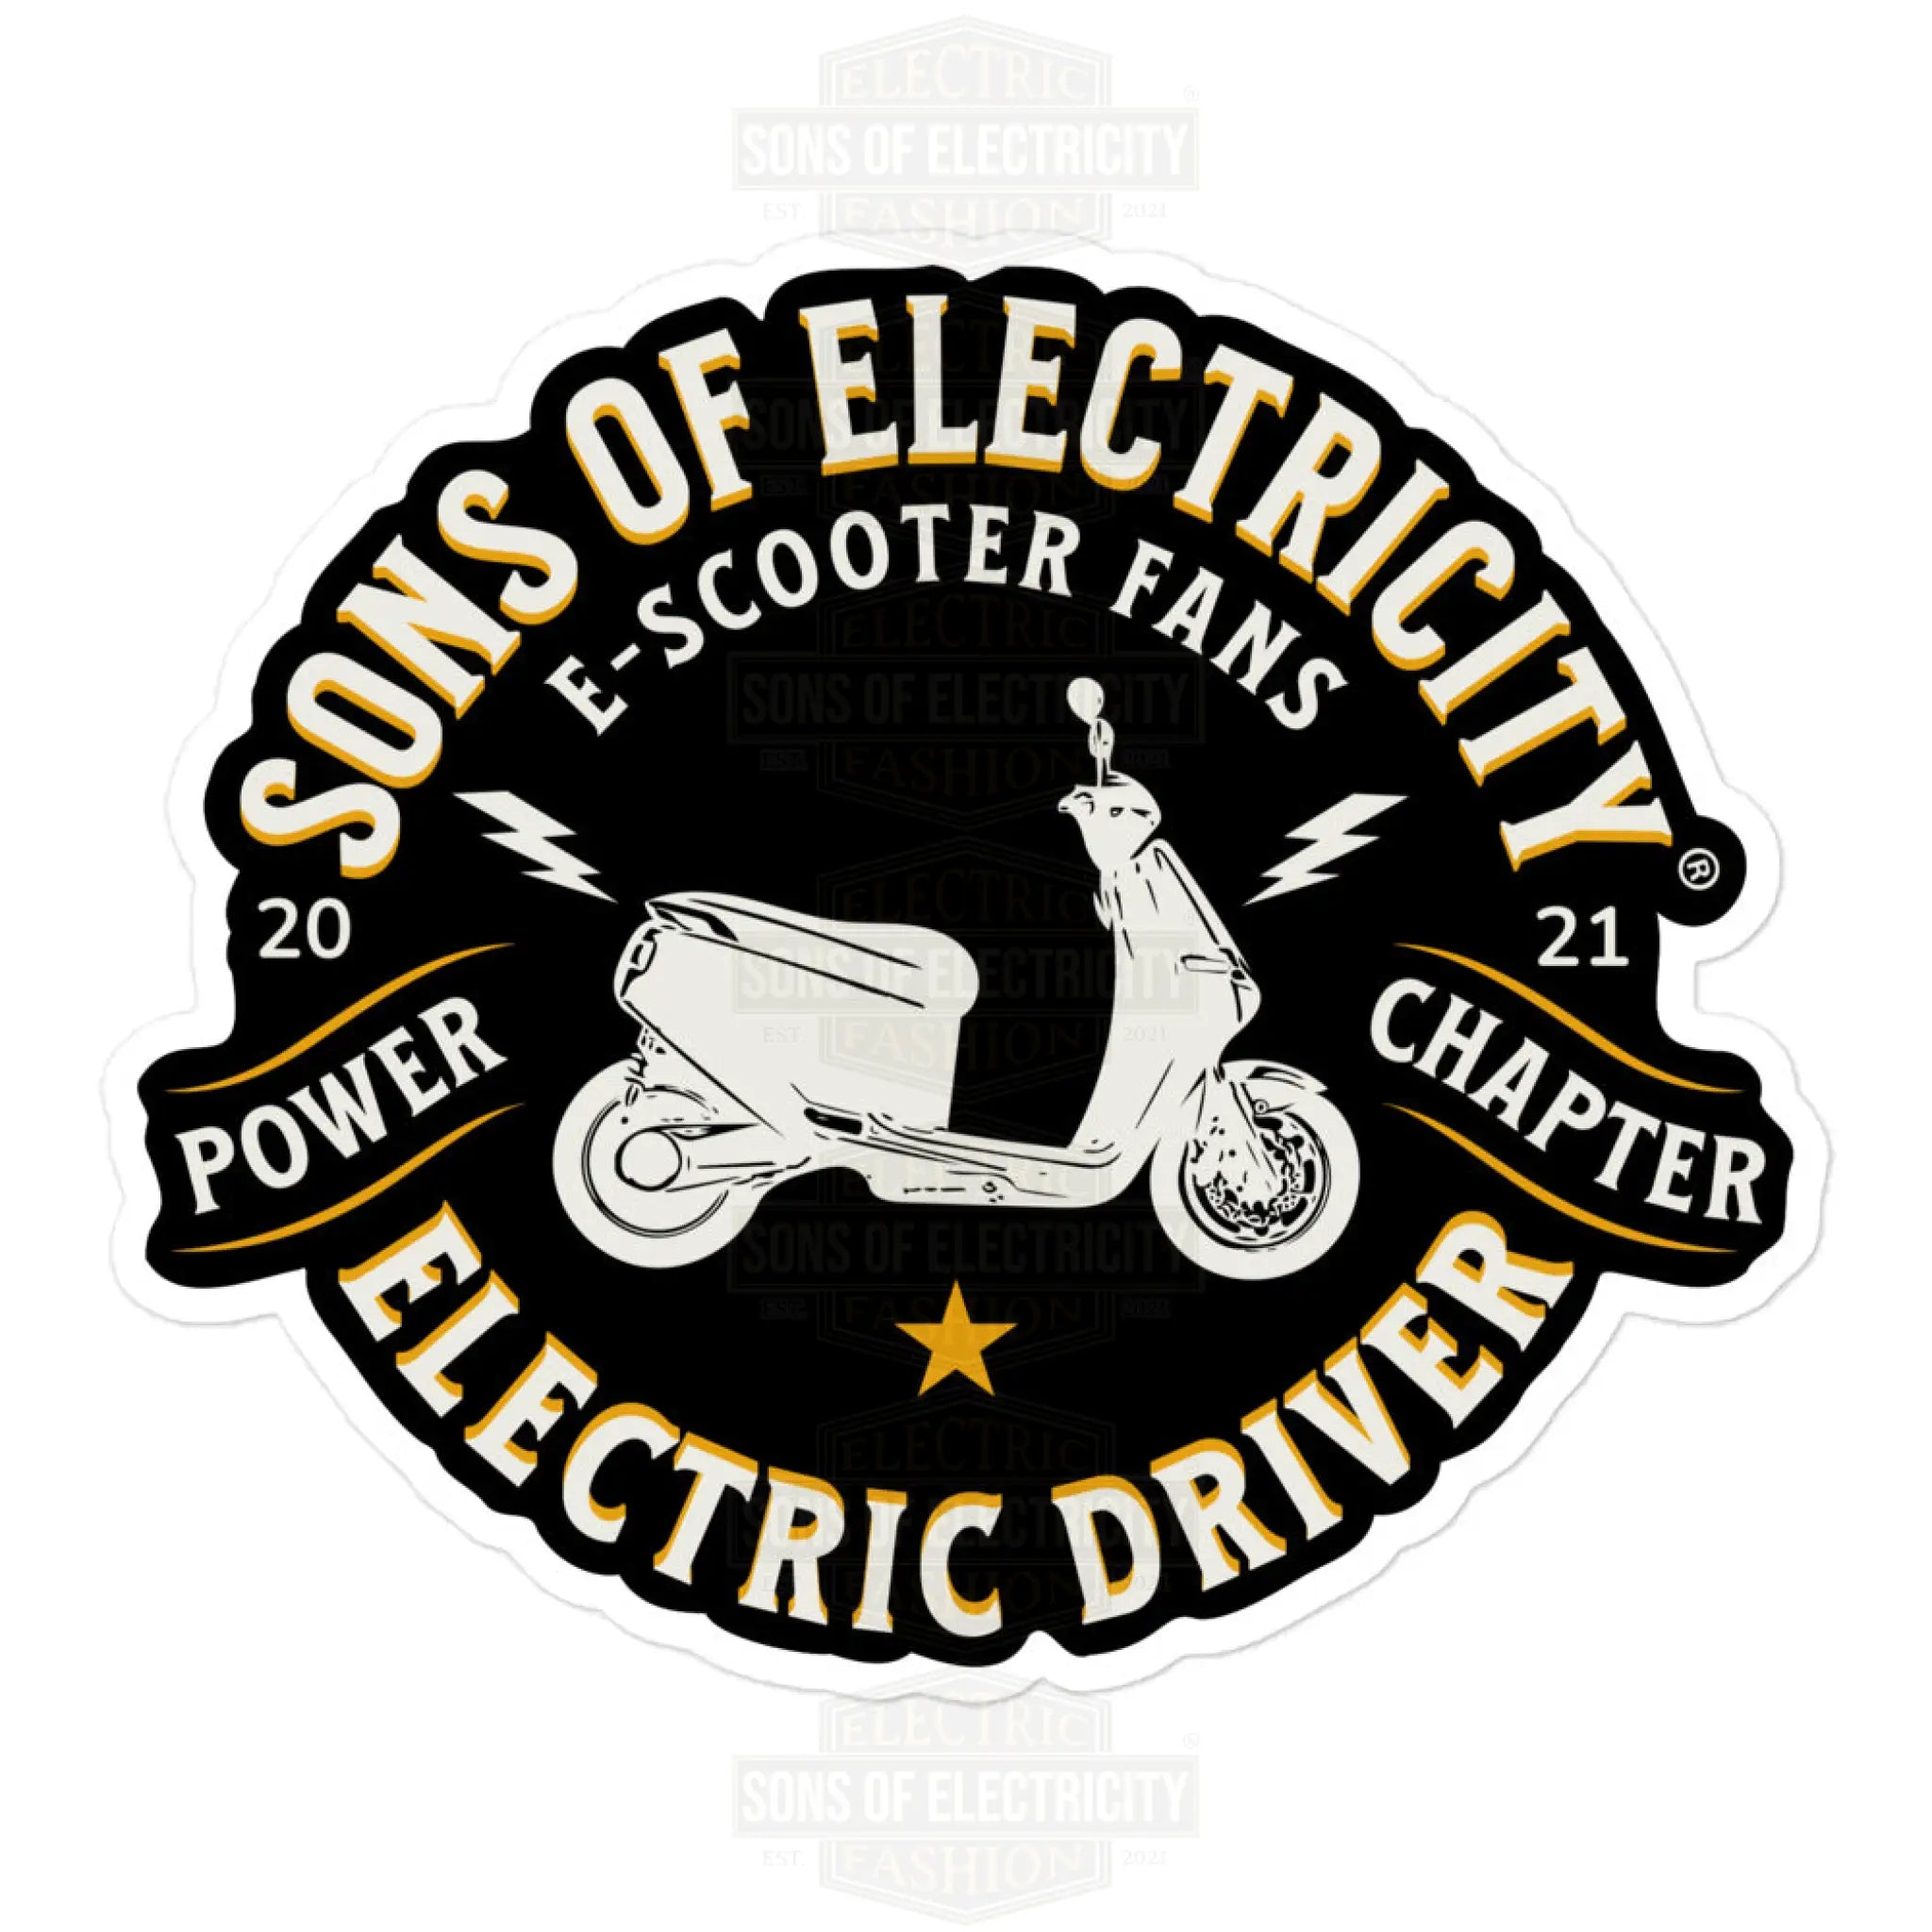 E-Motorroller Aufkleber: SONS OF ELECTRICITY E-Scooter Fans - SONS OF  ELECTRICITY